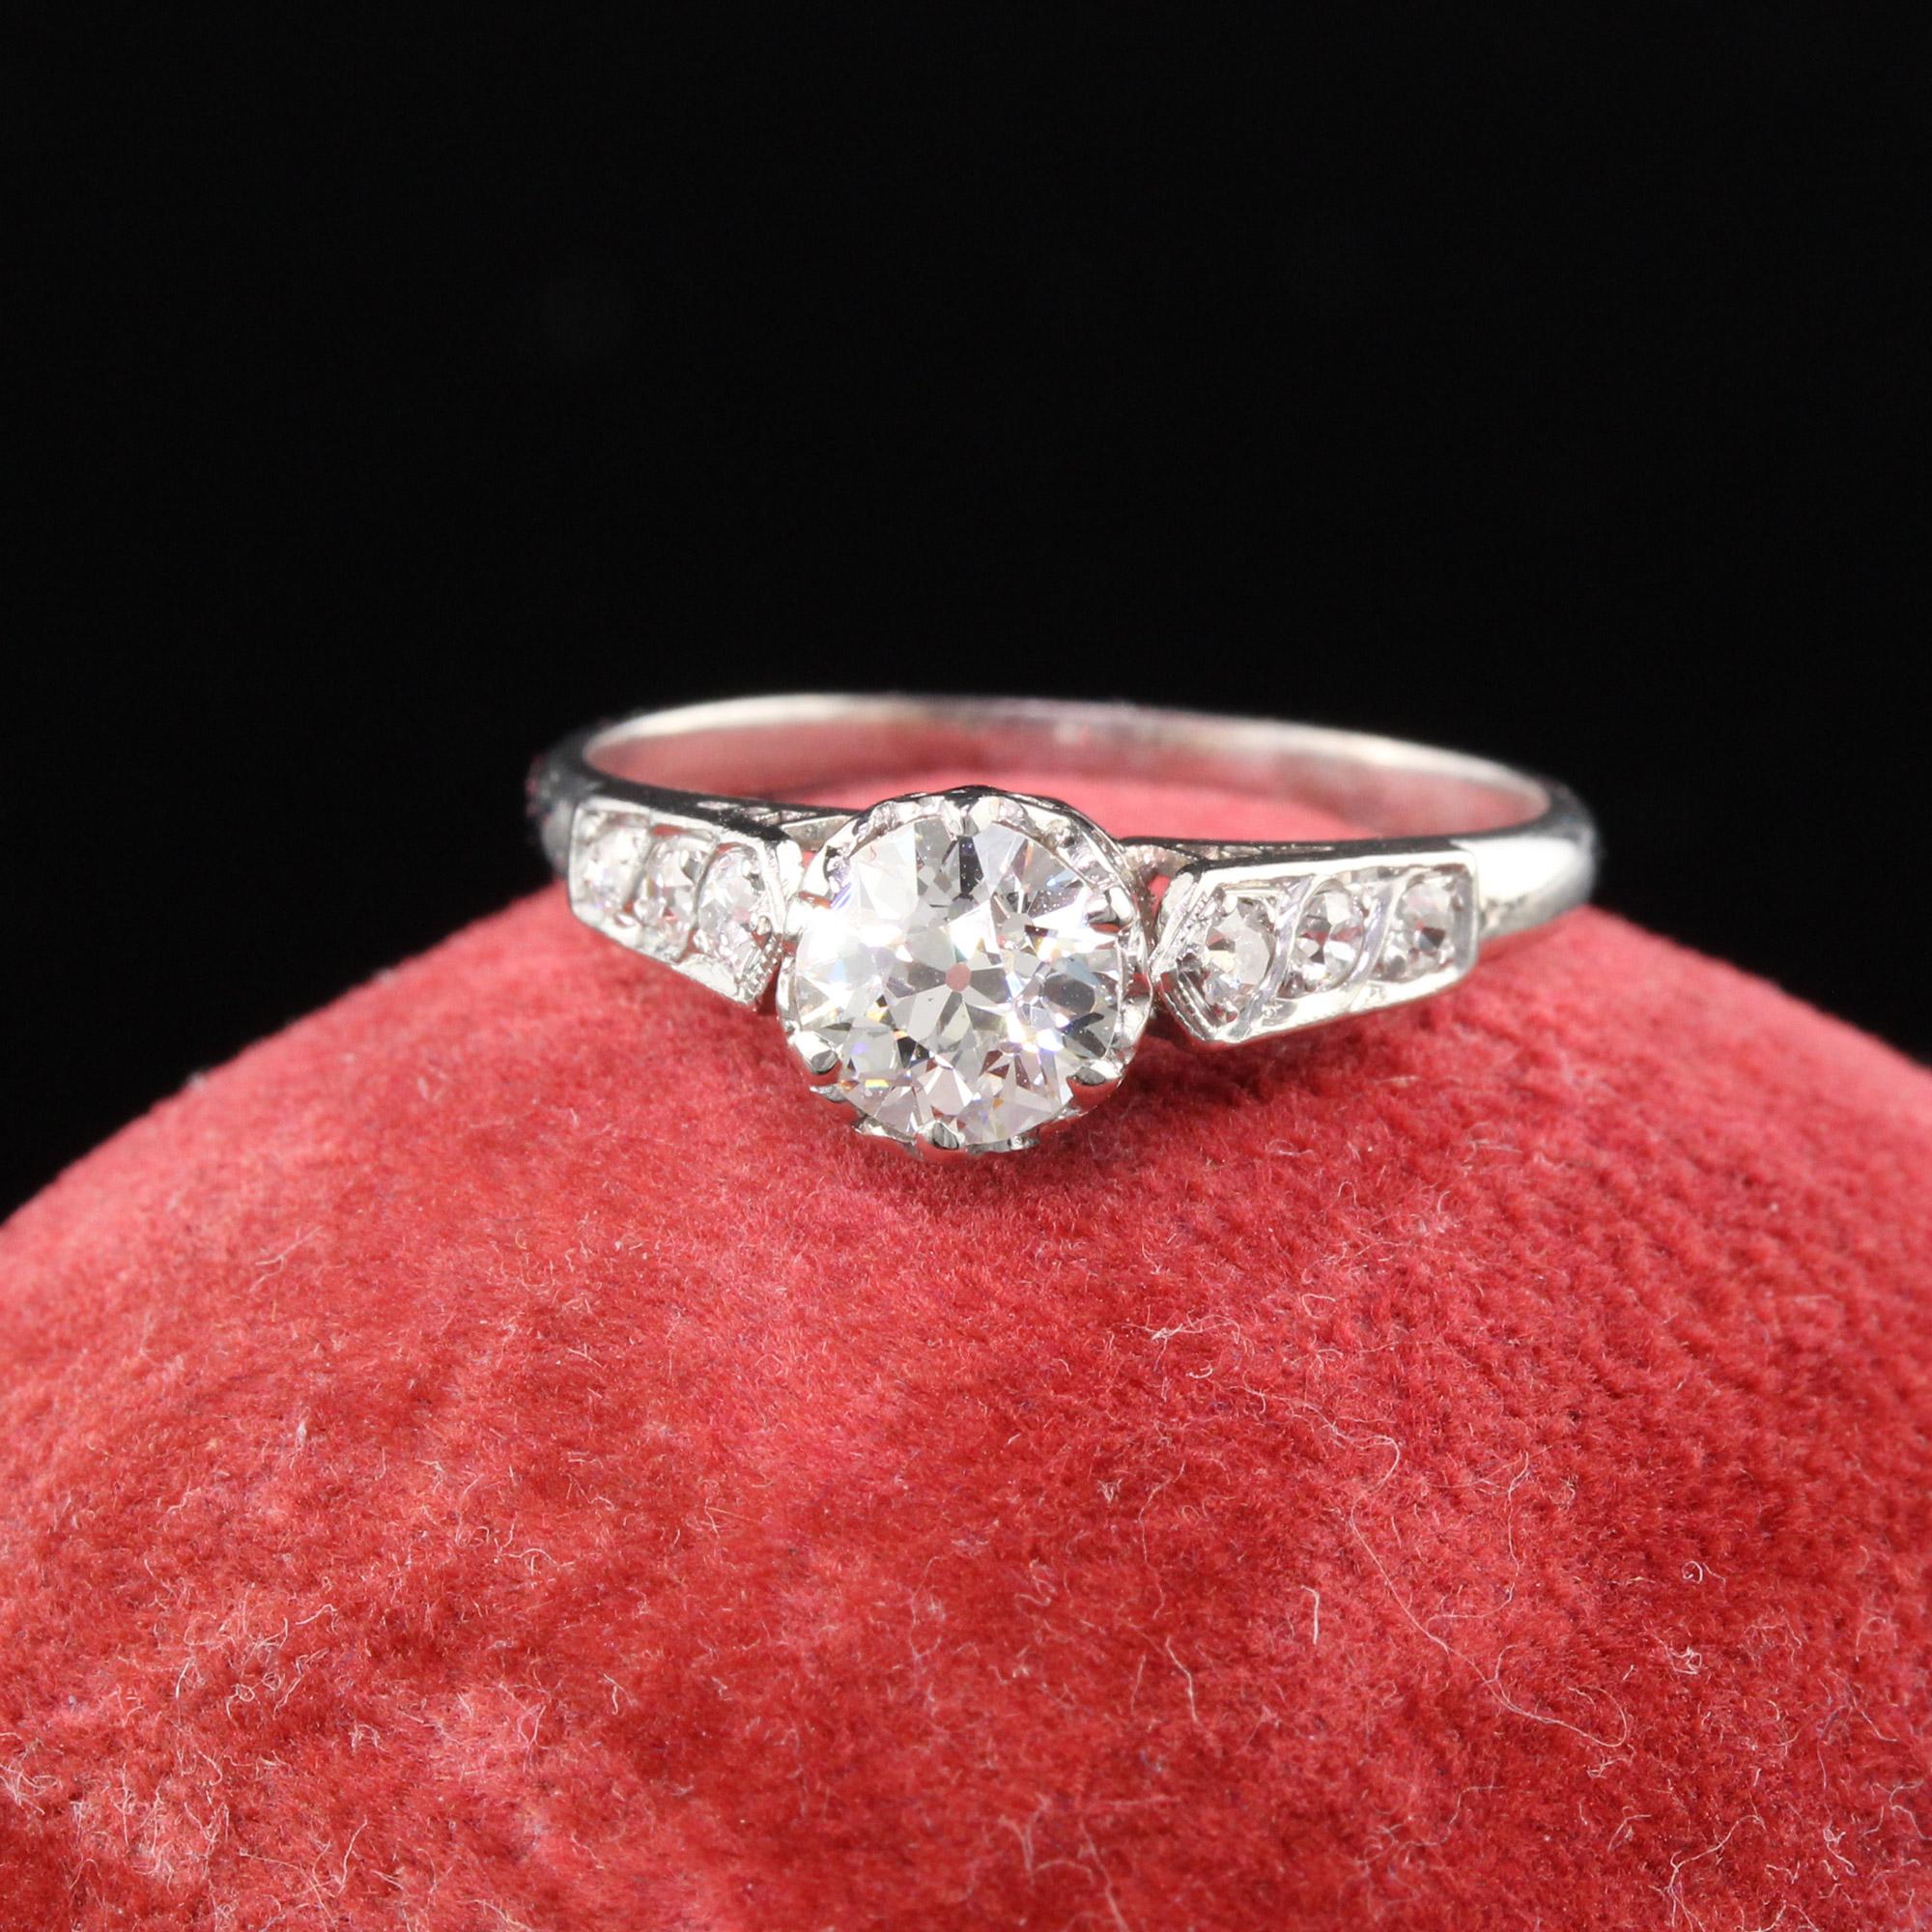 Classic Edwardian Engagement Ring with and Old european cut diamond in the center set with 6 prongs. Three old cut diamonds are set on either side of the shank.

#R0154

Metal: Platinum

Weight: 3.4 Grams

Center Diamond Weight: 0.66 cts

Center